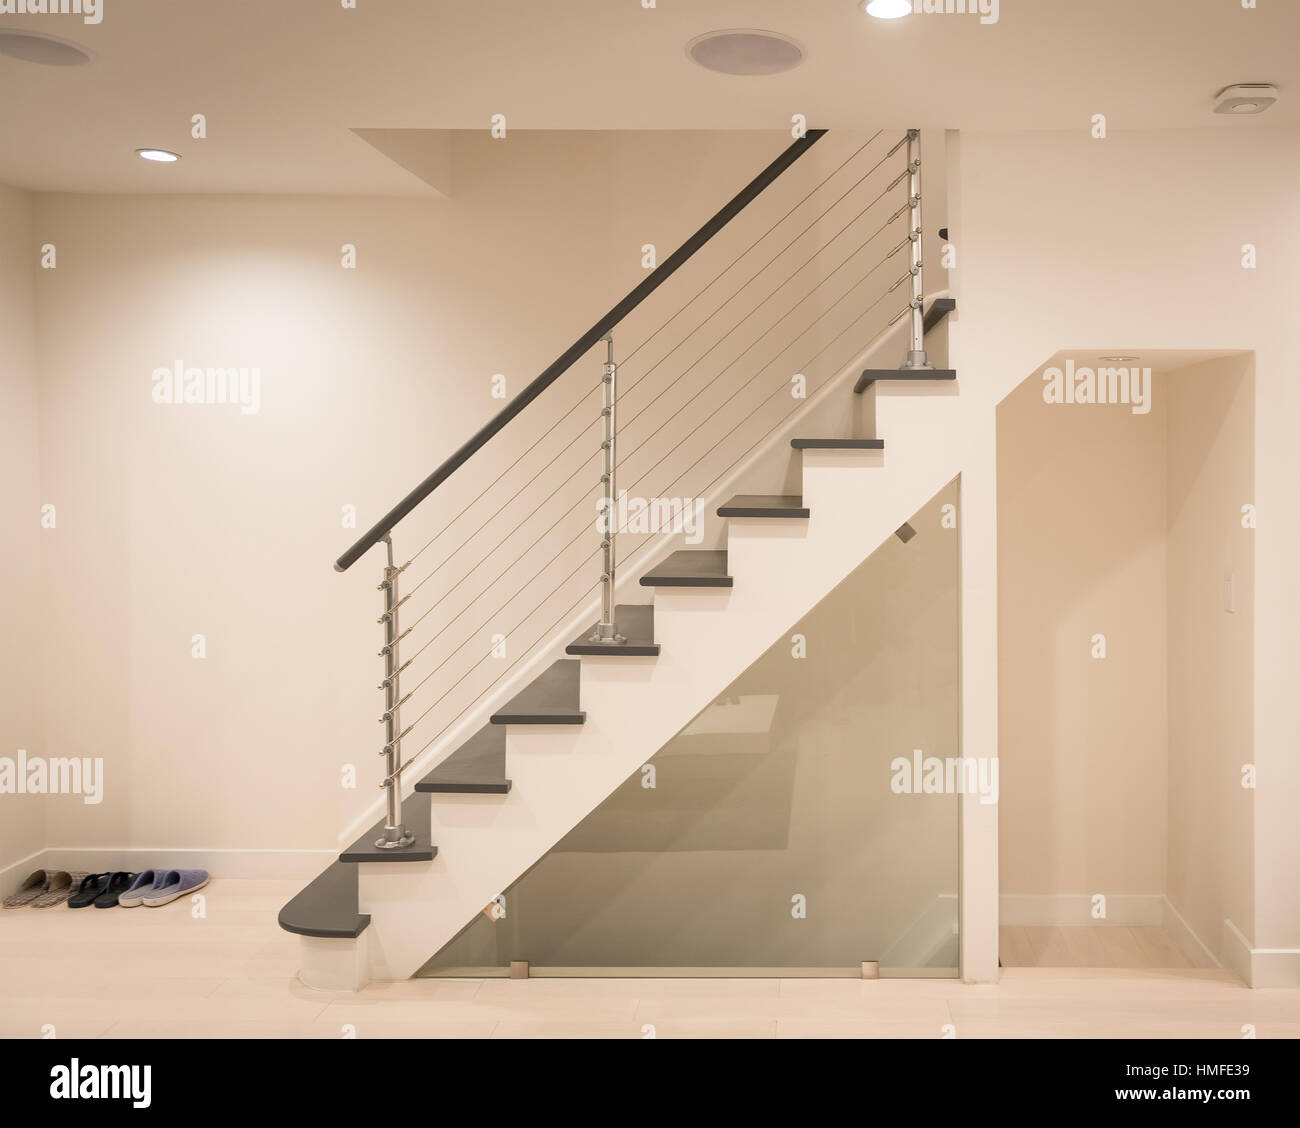 Modern staircase and hand rail design in white and grey color Stock Photo